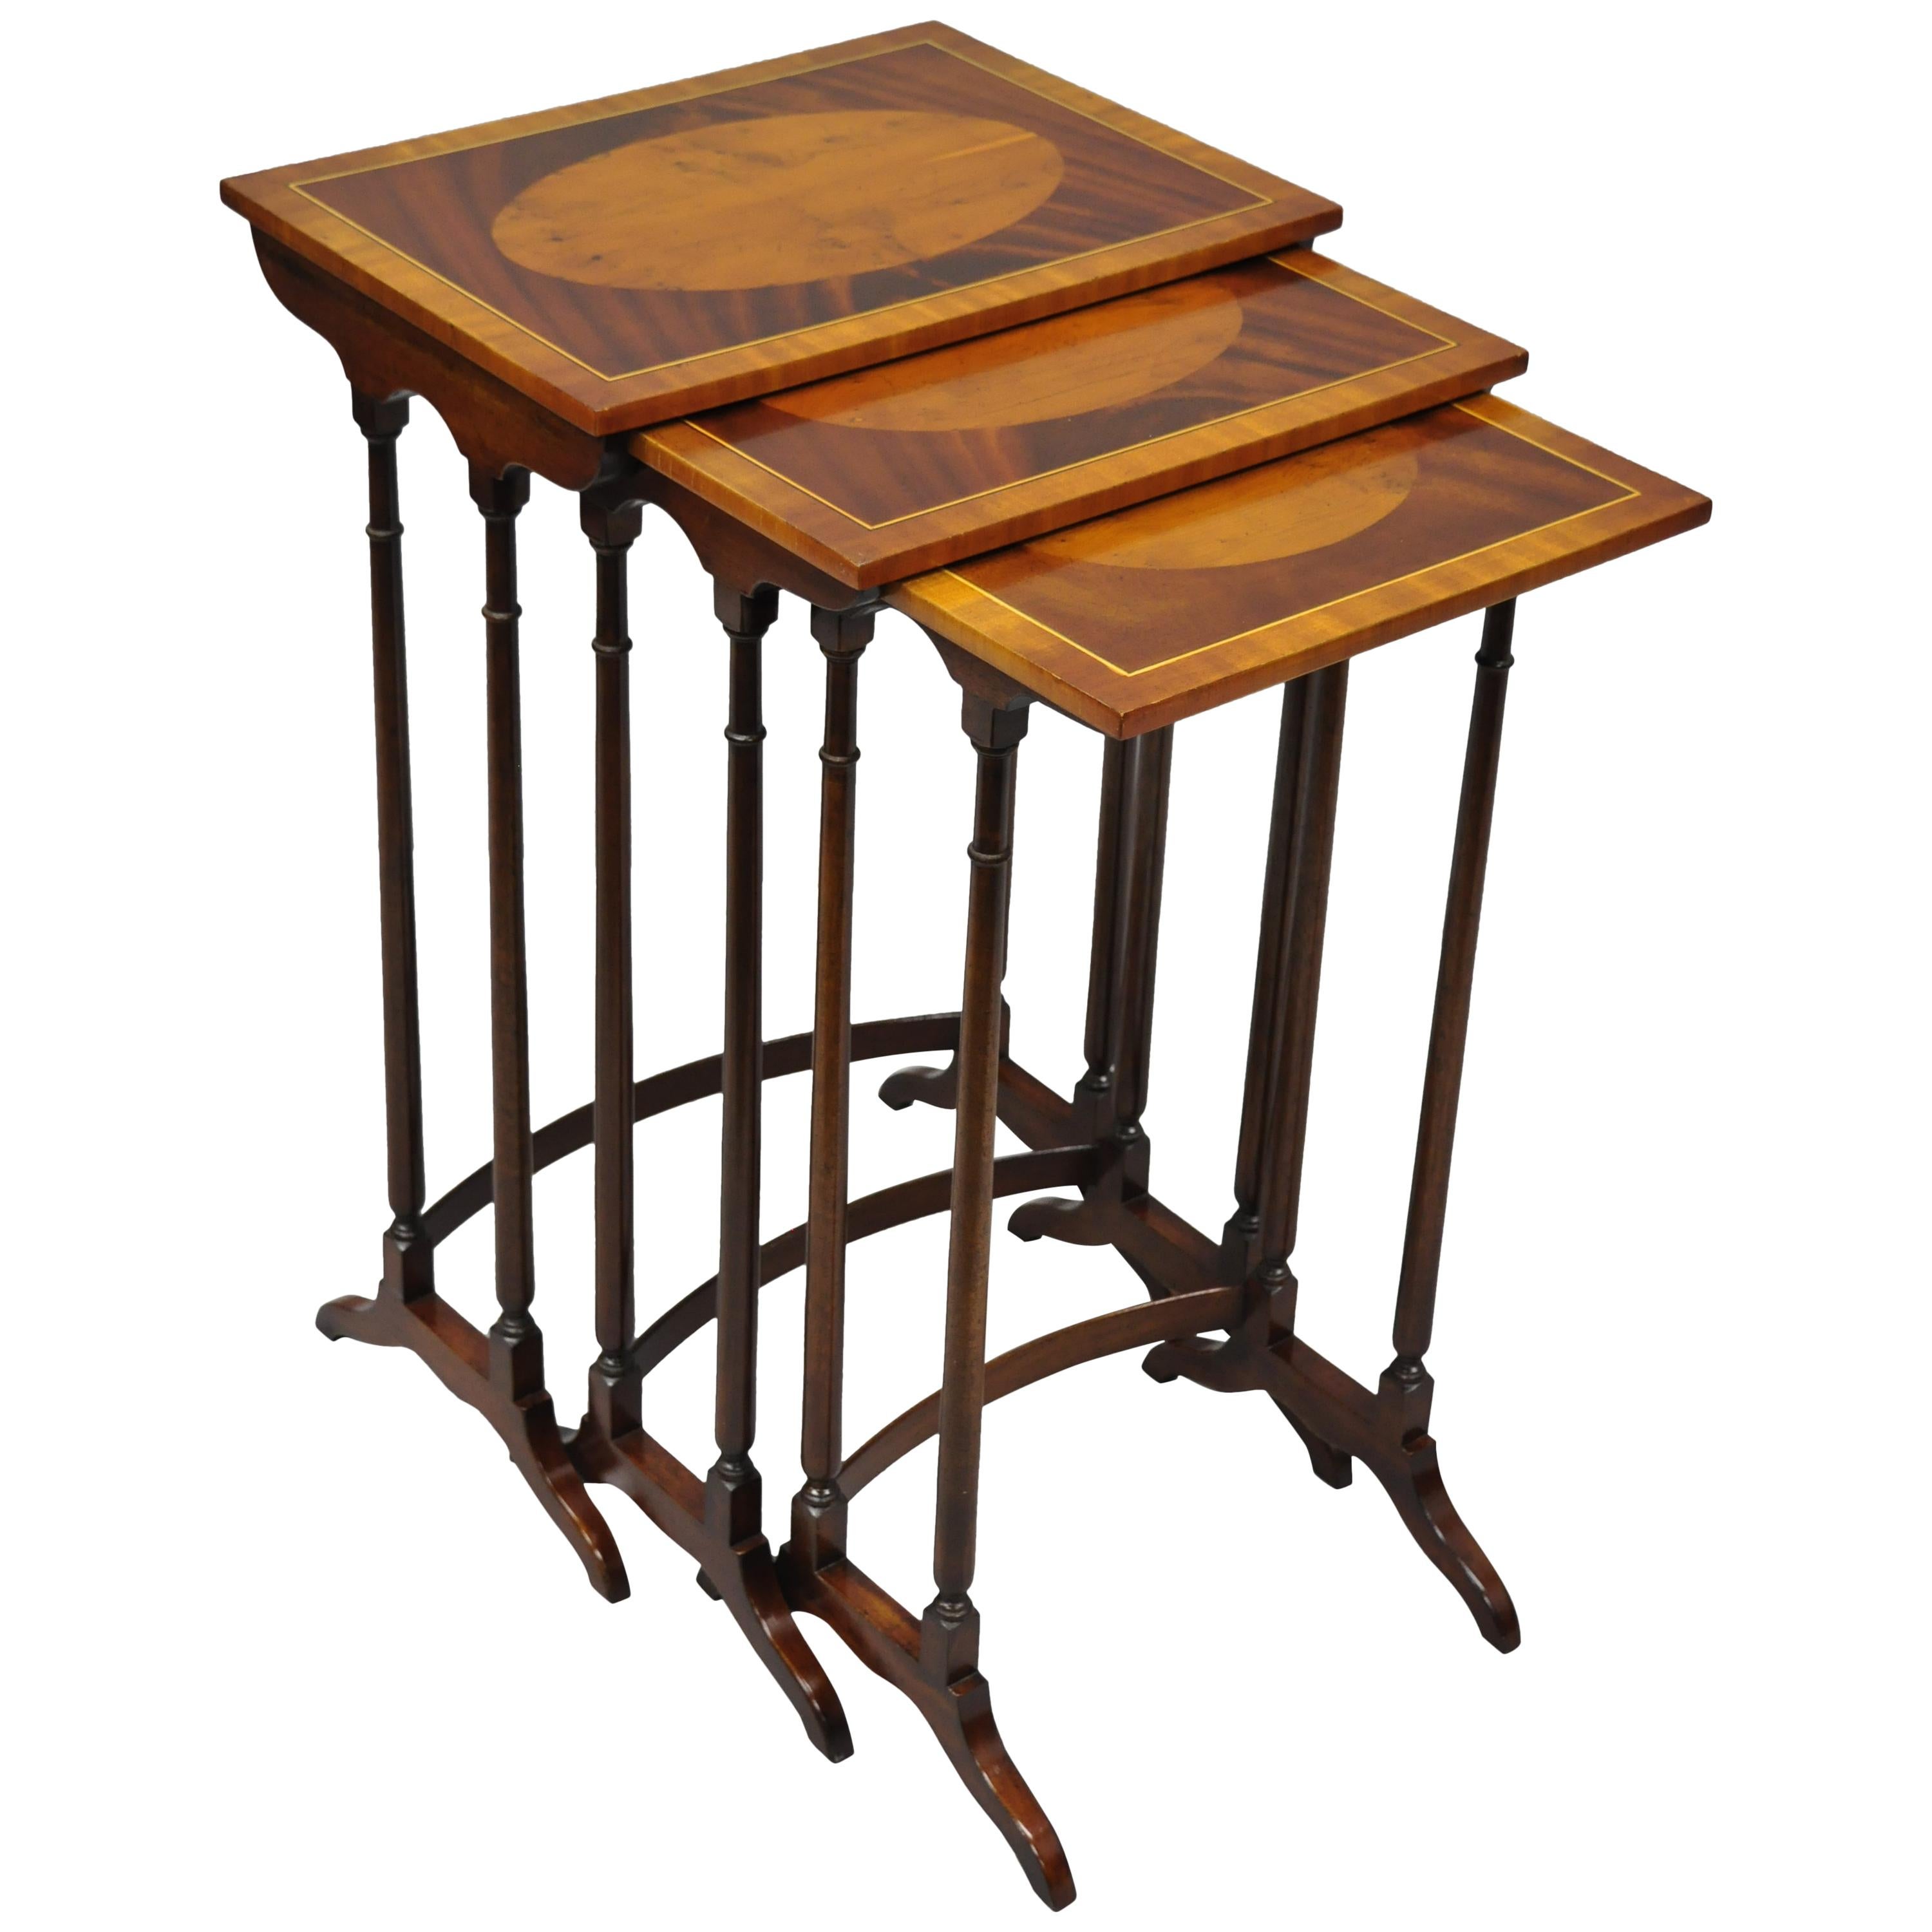 3-Tier Yew Wood & Mahogany English Regency Style Inlaid Nesting End Side Tables